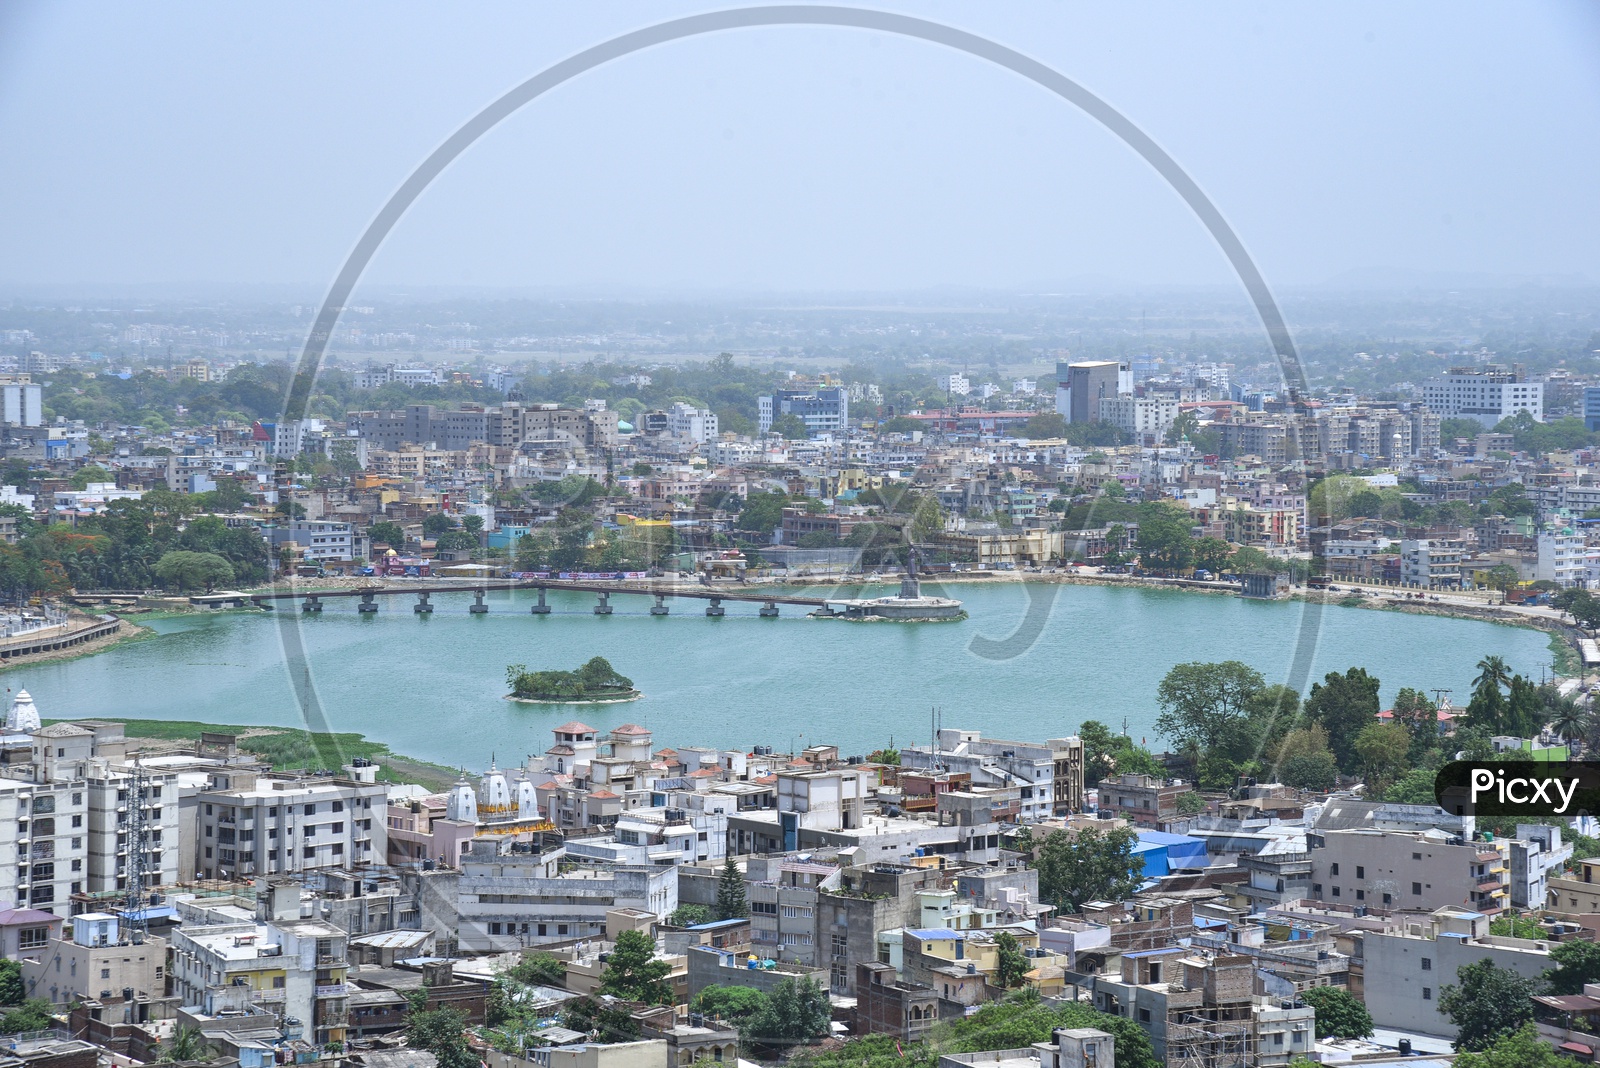 City Scape Of Ranchi  or Aerial View of Ranchi City